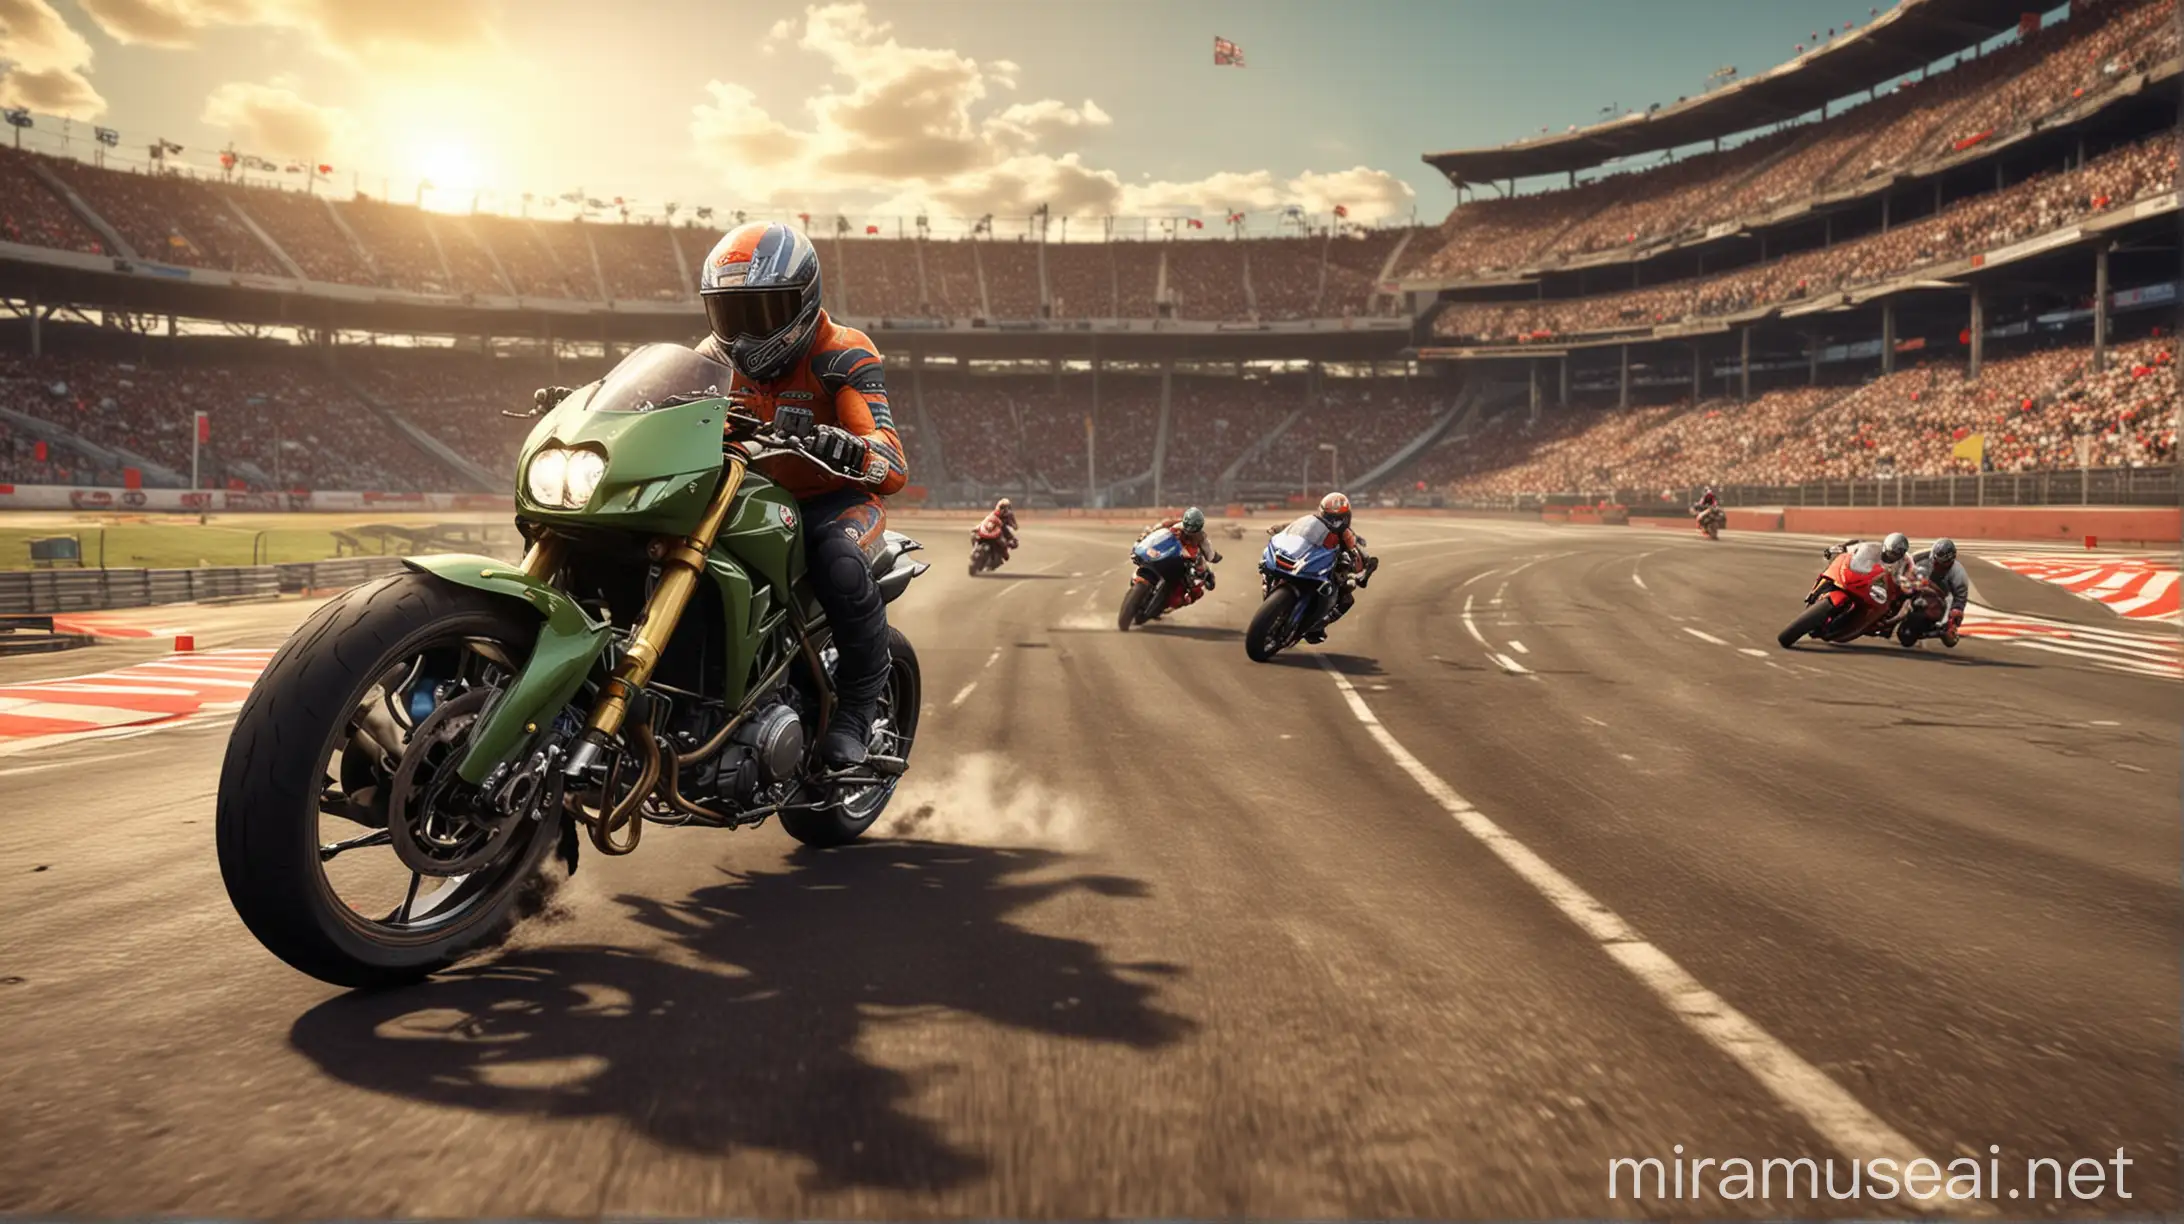 imagine moto racing game 3d images,fast bike racing effects, add racing stadium with tracks and crowd in background, character should be more highlight .make it more attractive like game icon, it is lap racing game